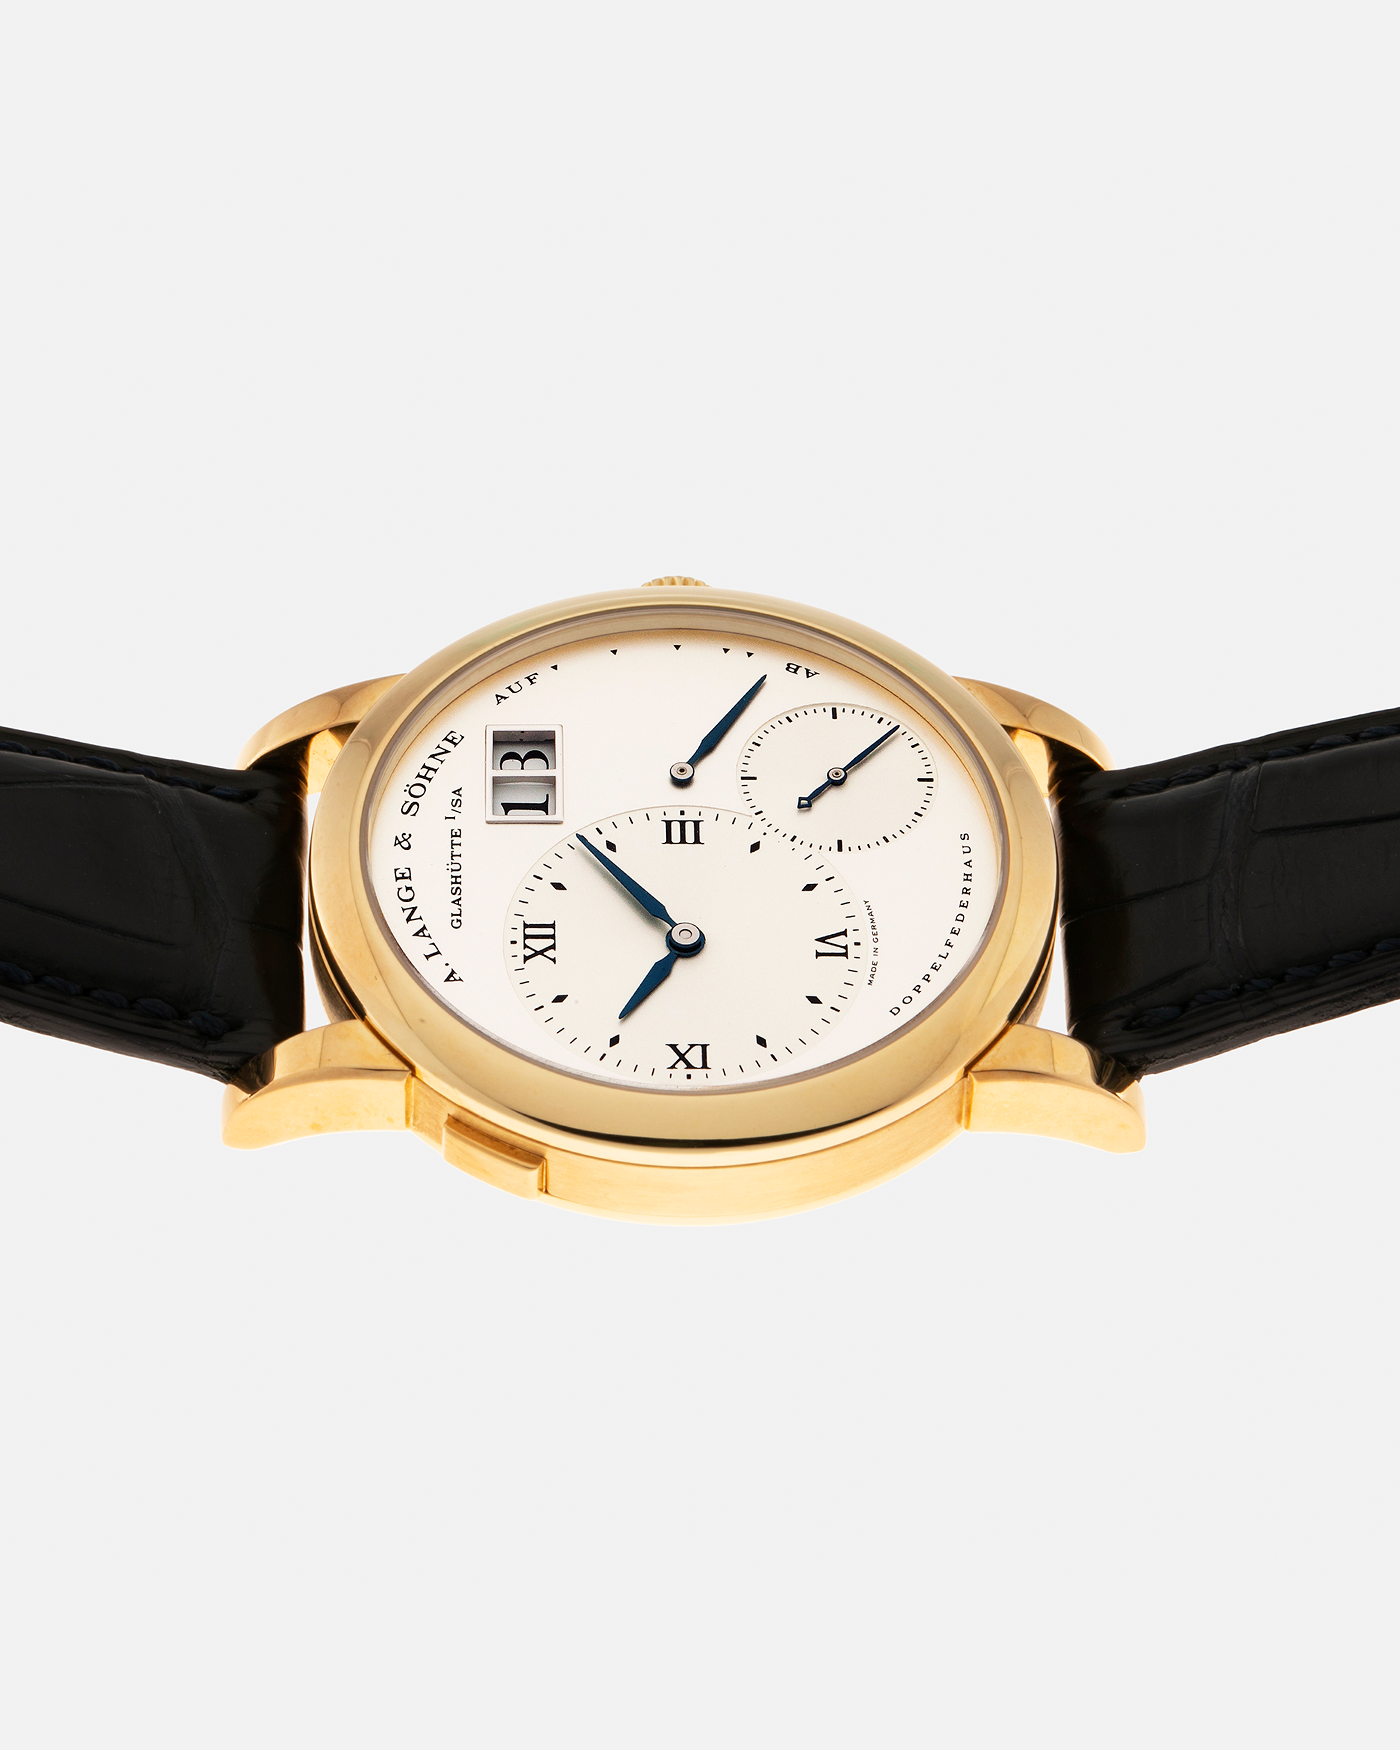 Brand: A. Lange & Söhne Year: 2000s Model: Lange 1 Reference: 101.022 Material: 18-carat Yellow Gold, German Silver Movement: A. Lange & Söhne Cal. L901.0, Manual-Winding Case Diameter: 38.5mm Lug Width: 20mm Strap: A. Lange & Söhne Black Alligator Leather Strap with Signed 18-carat Yellow Gold Tang Buckle